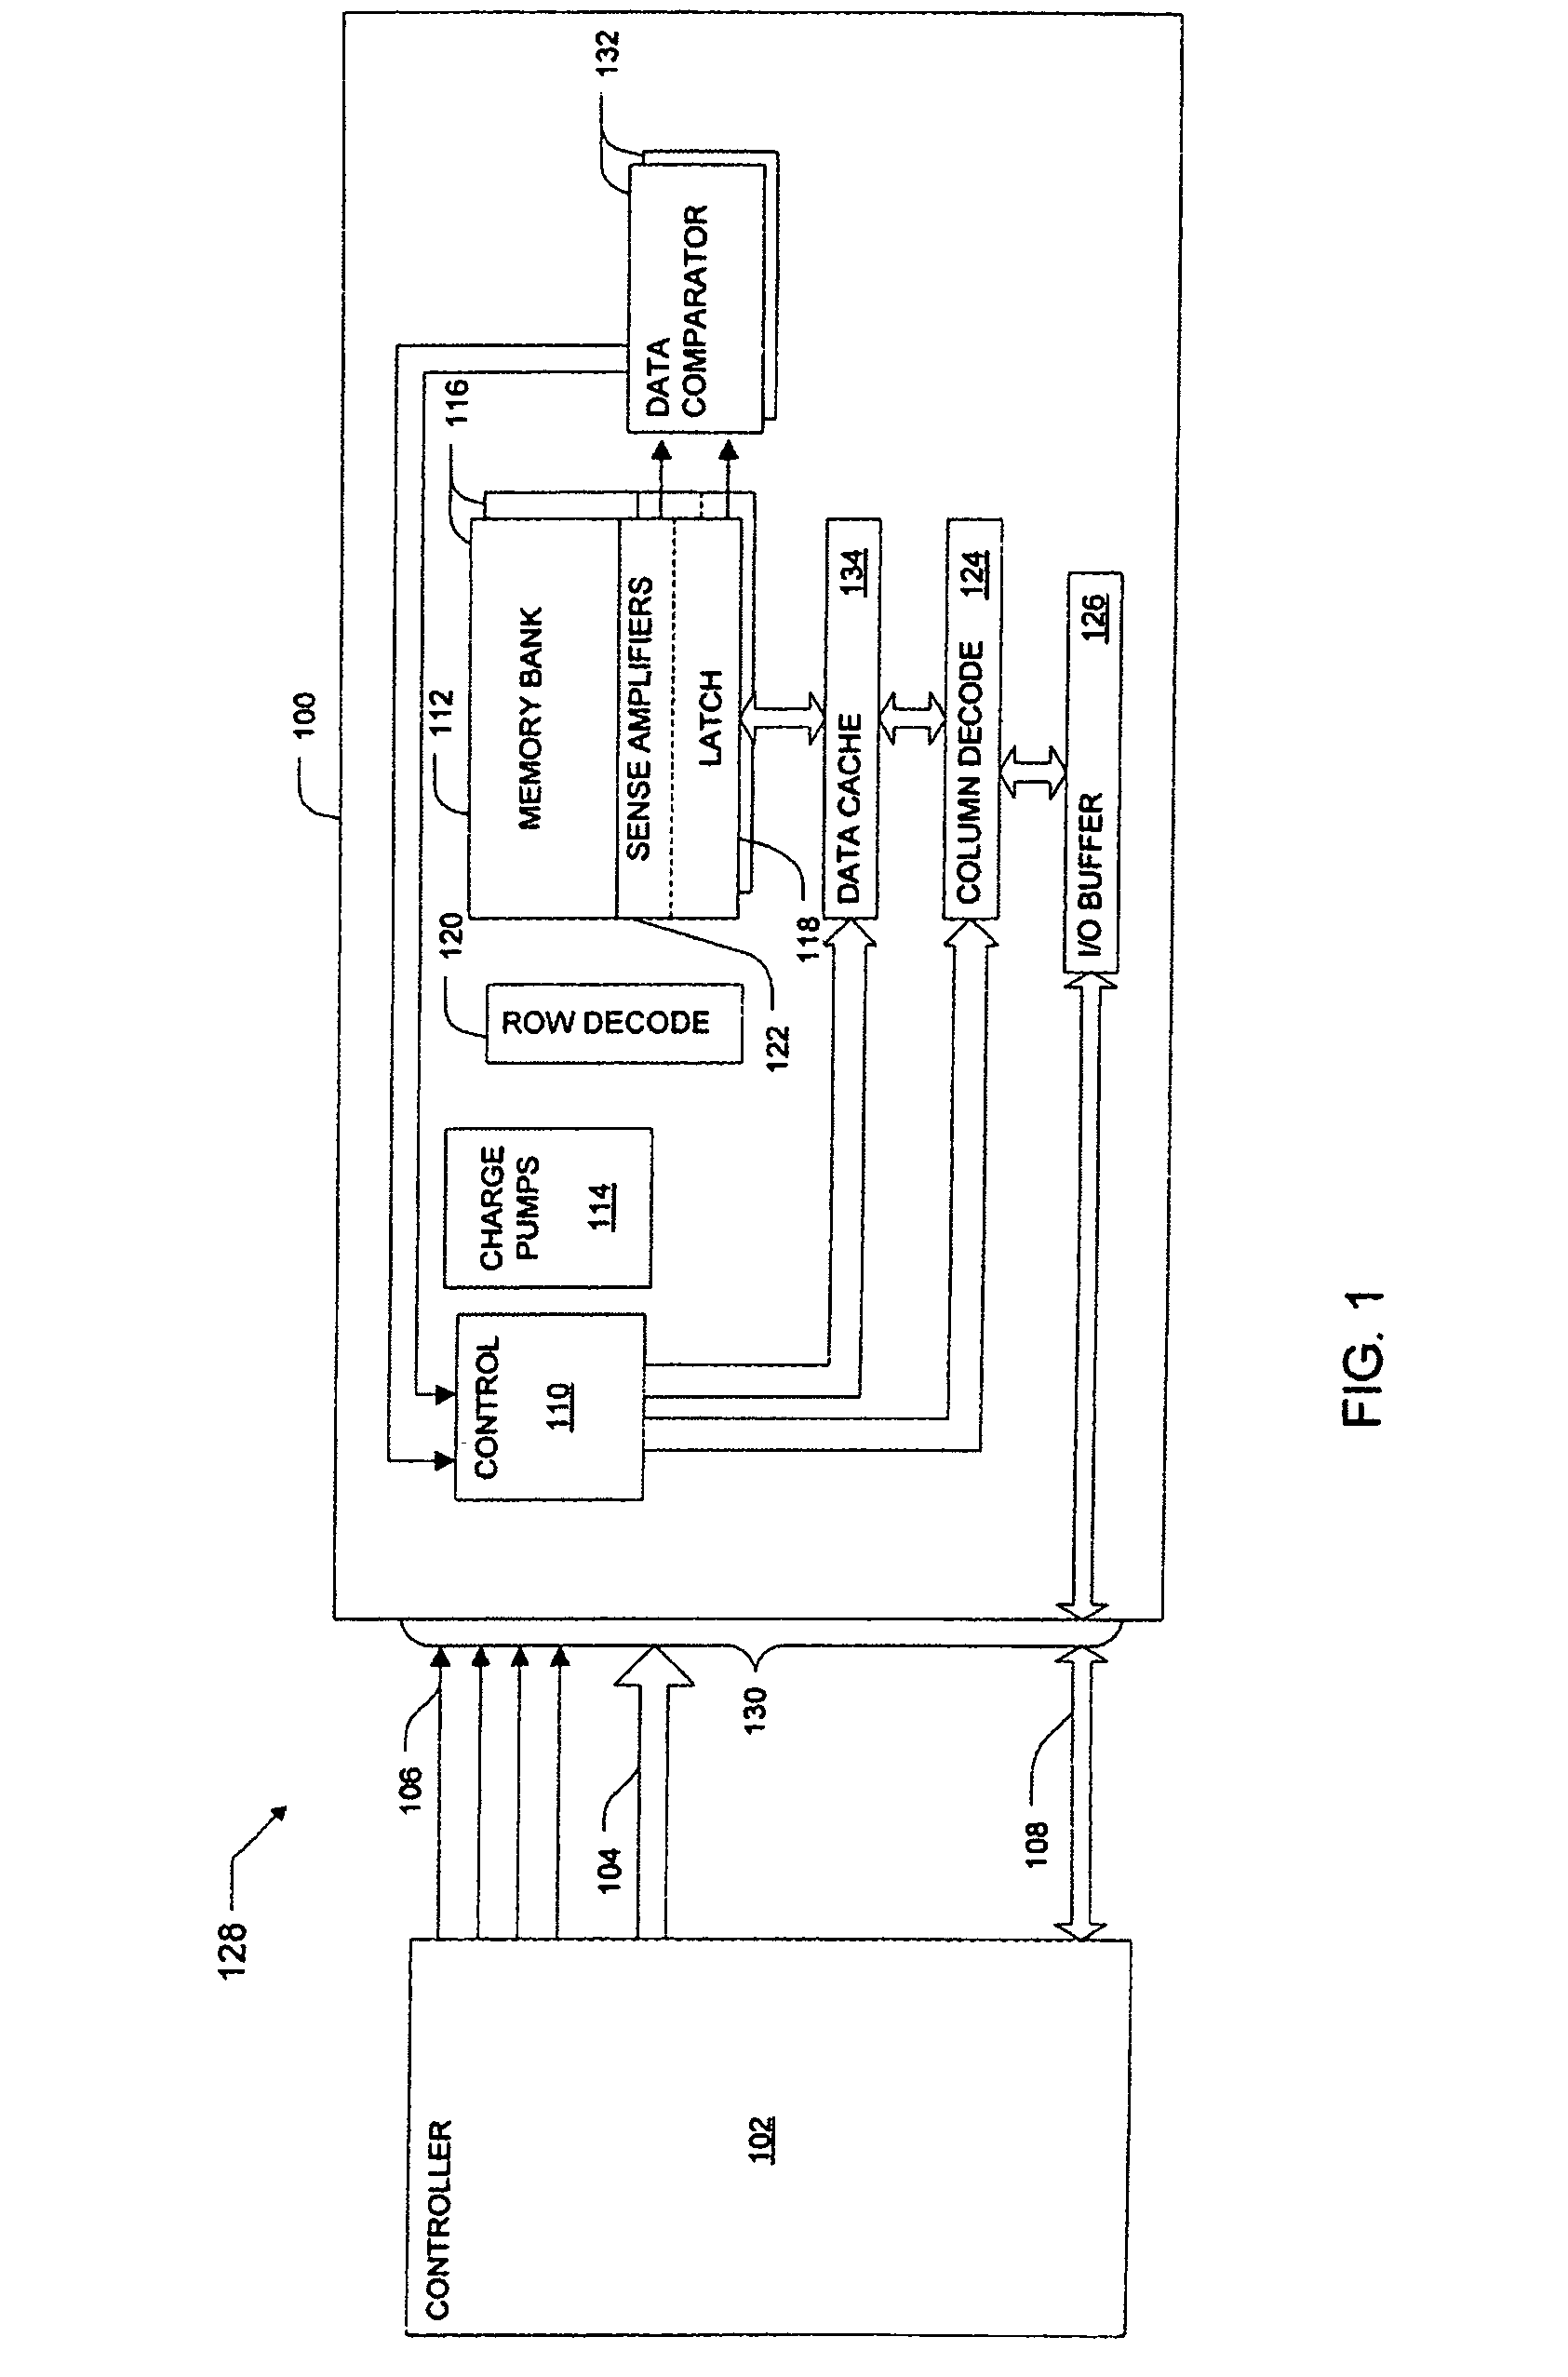 Interleaved memory program and verify method, device and system